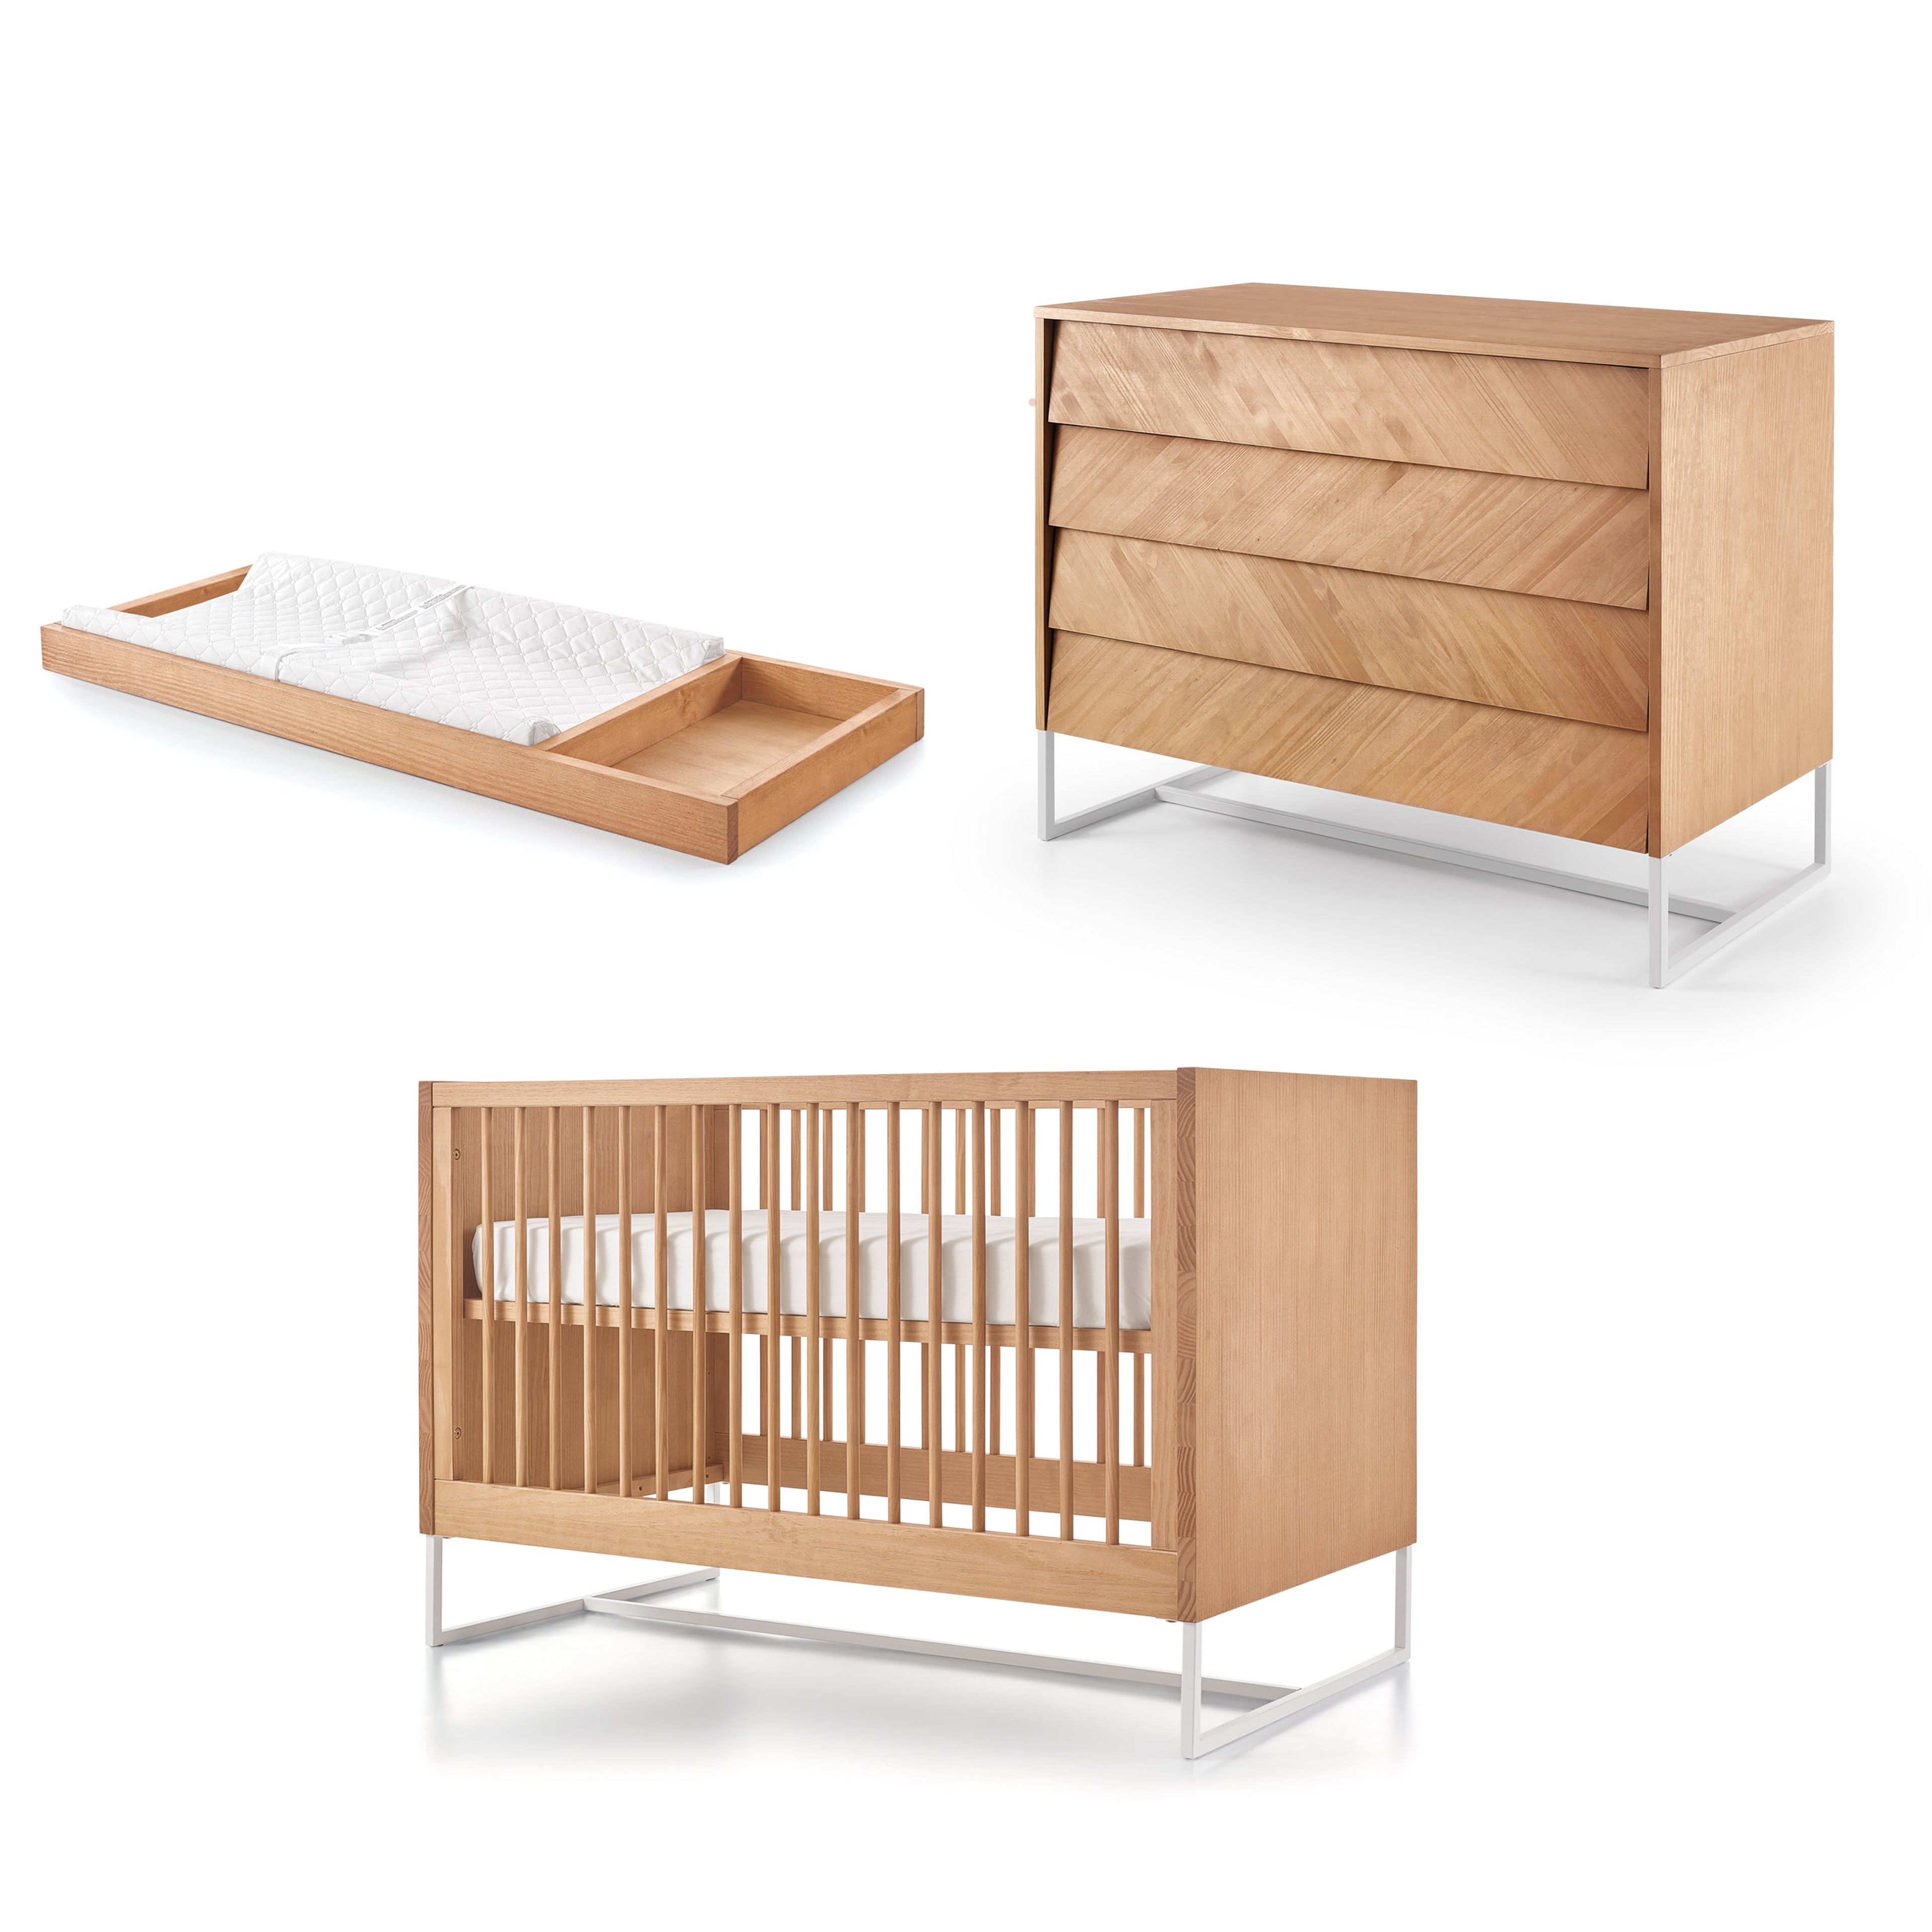 www.simplynursery.com/products/boho-noah-crib-chest-and-changing-tray-set